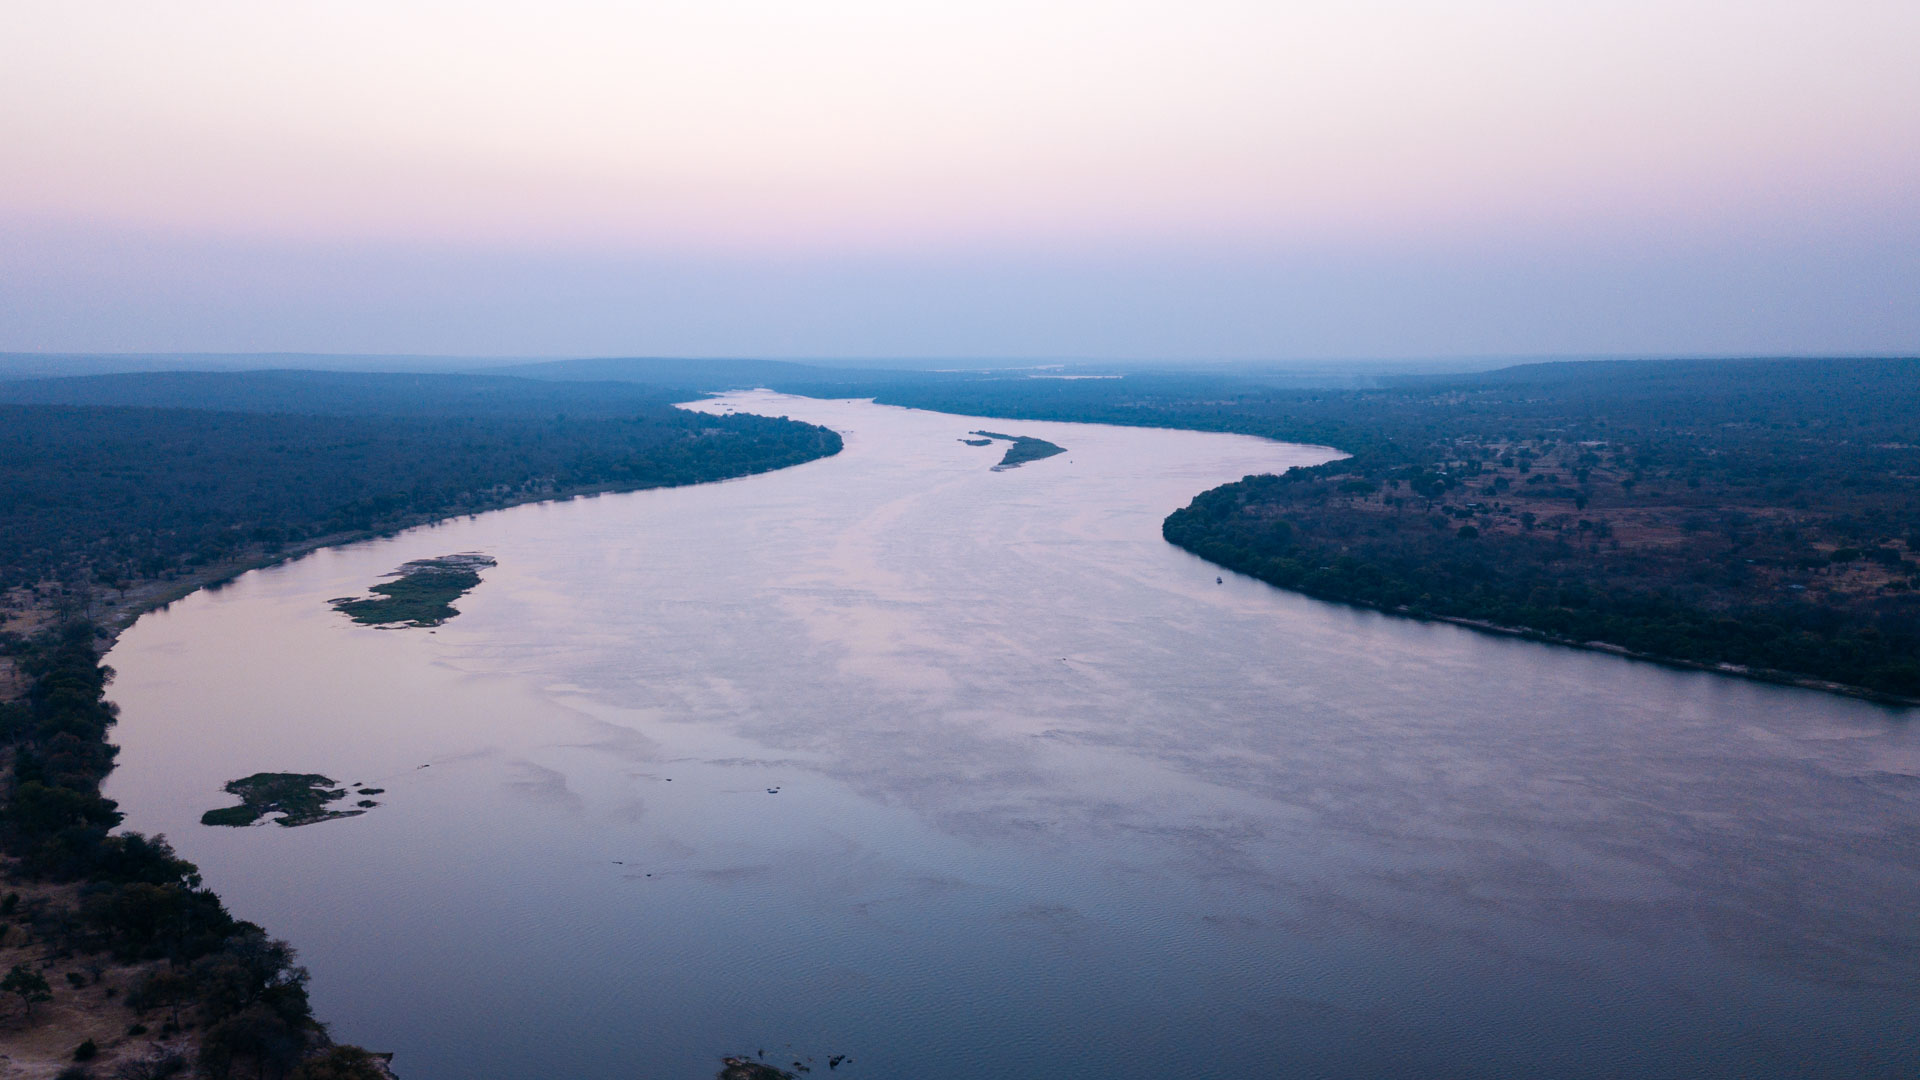 Above: The Zambezi River which flows through five countries